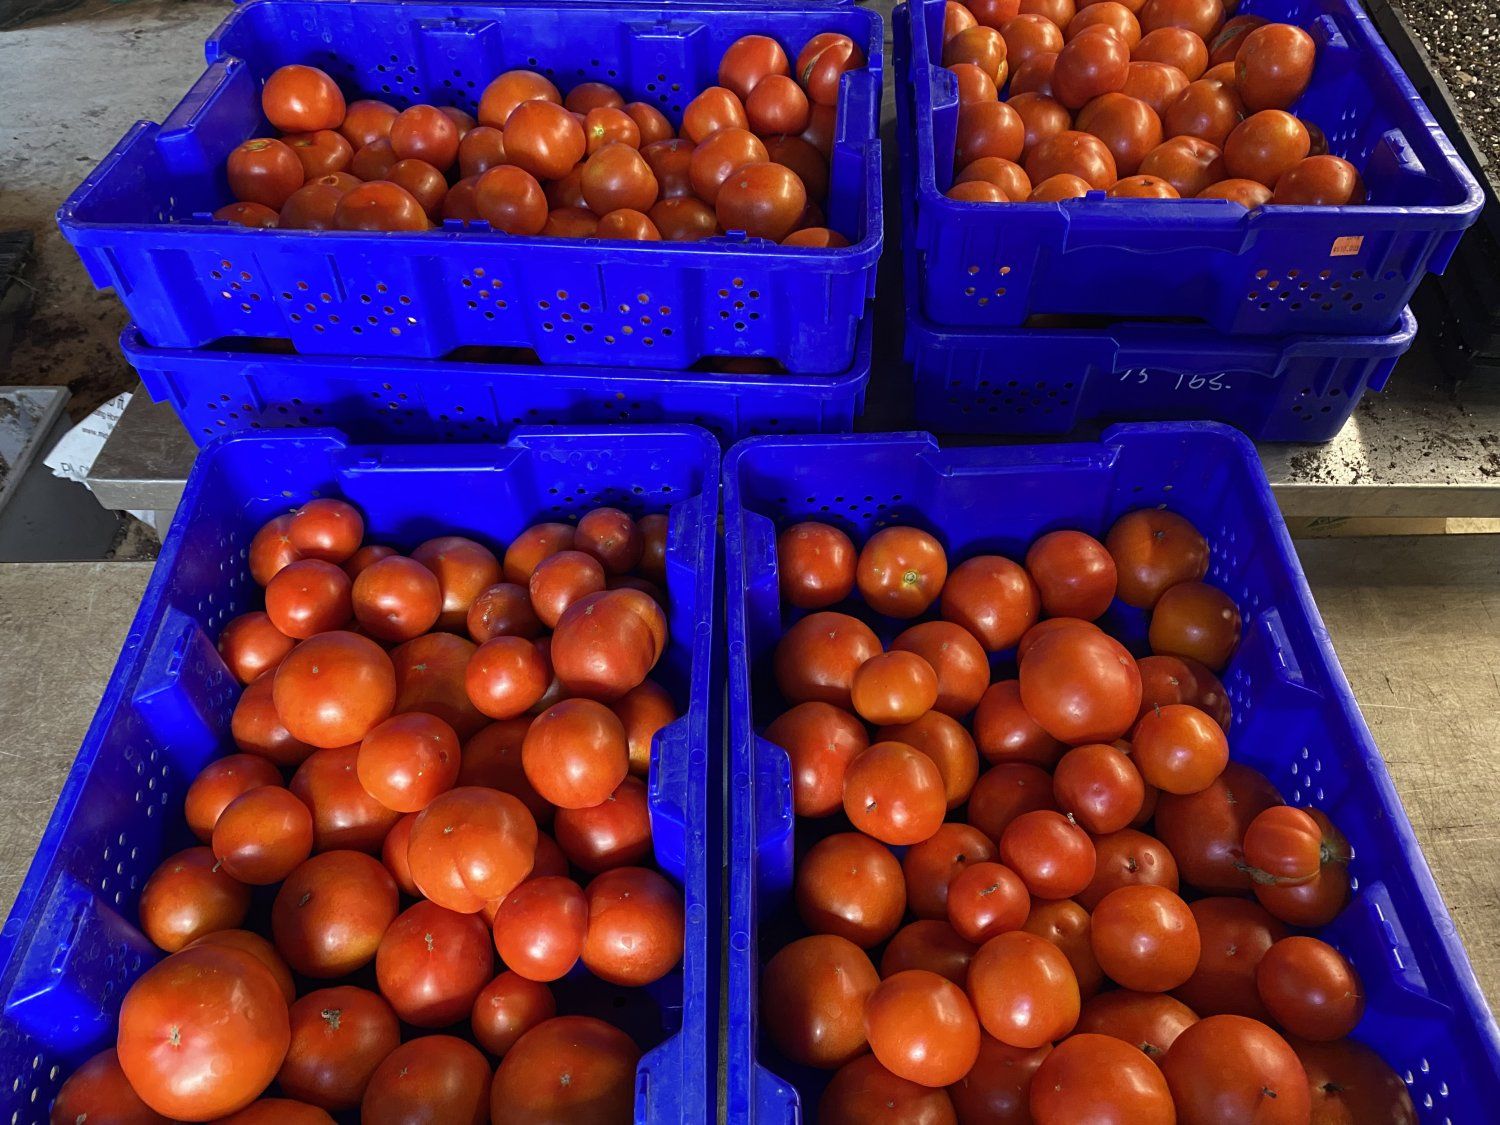 Previous Happening: Tomato Mania (Bulk Tomatoes Available While they Last!!!!)